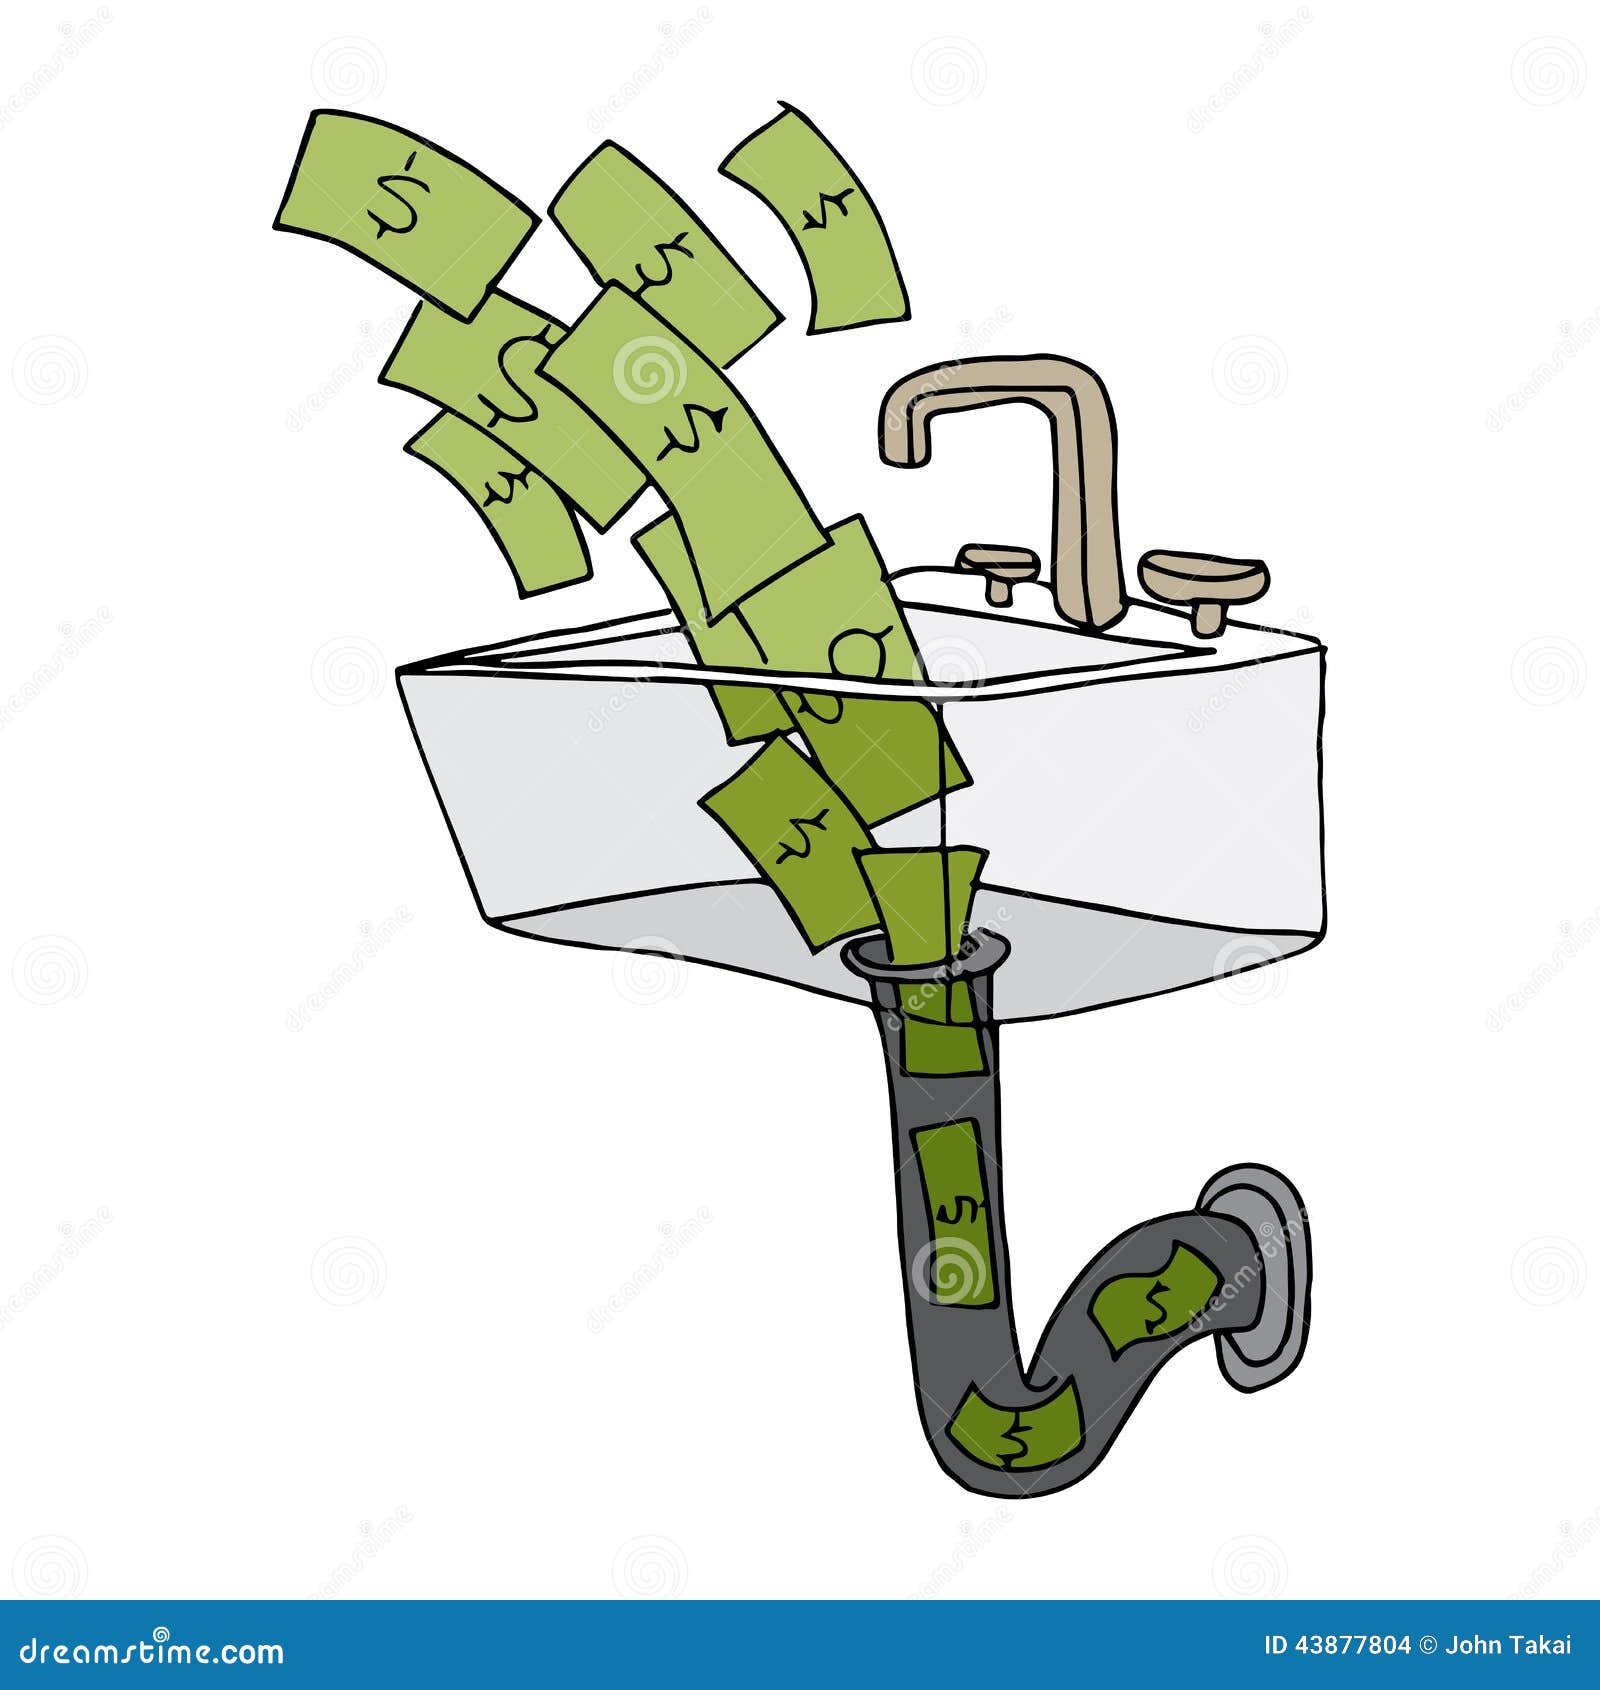 clipart of money going down the drain - photo #11